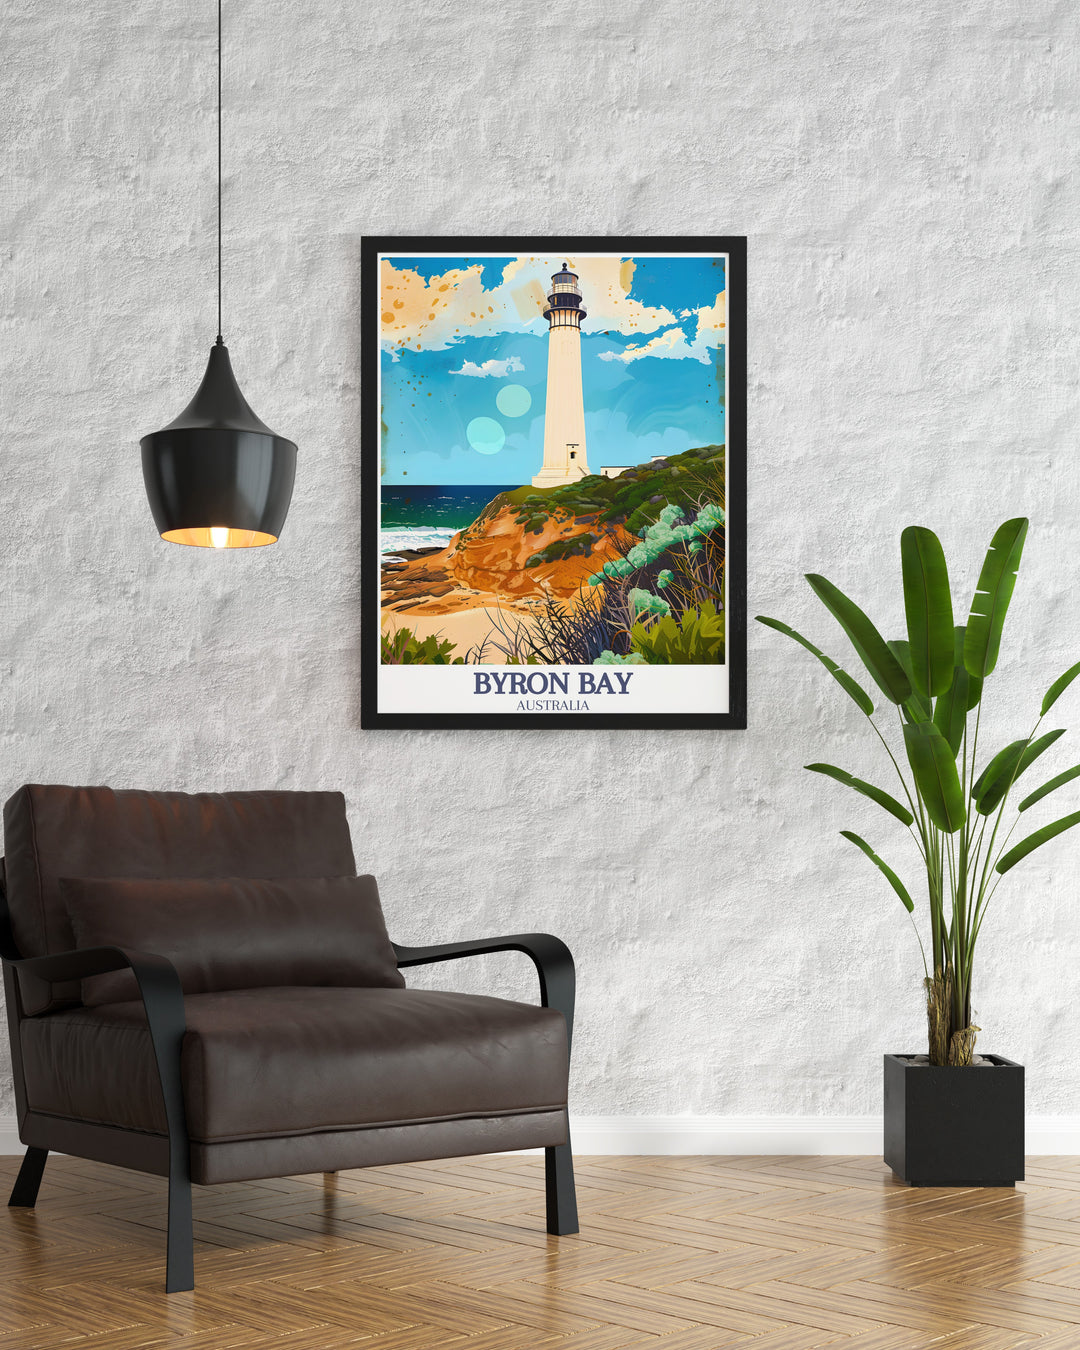 Main Beach and Byron Bay Lighthouse are beautifully depicted in this Byron Bay Art Print. Perfect for lovers of coastal scenery this print brings the natural beauty and vibrant colors of Byron Bay into your home or office.